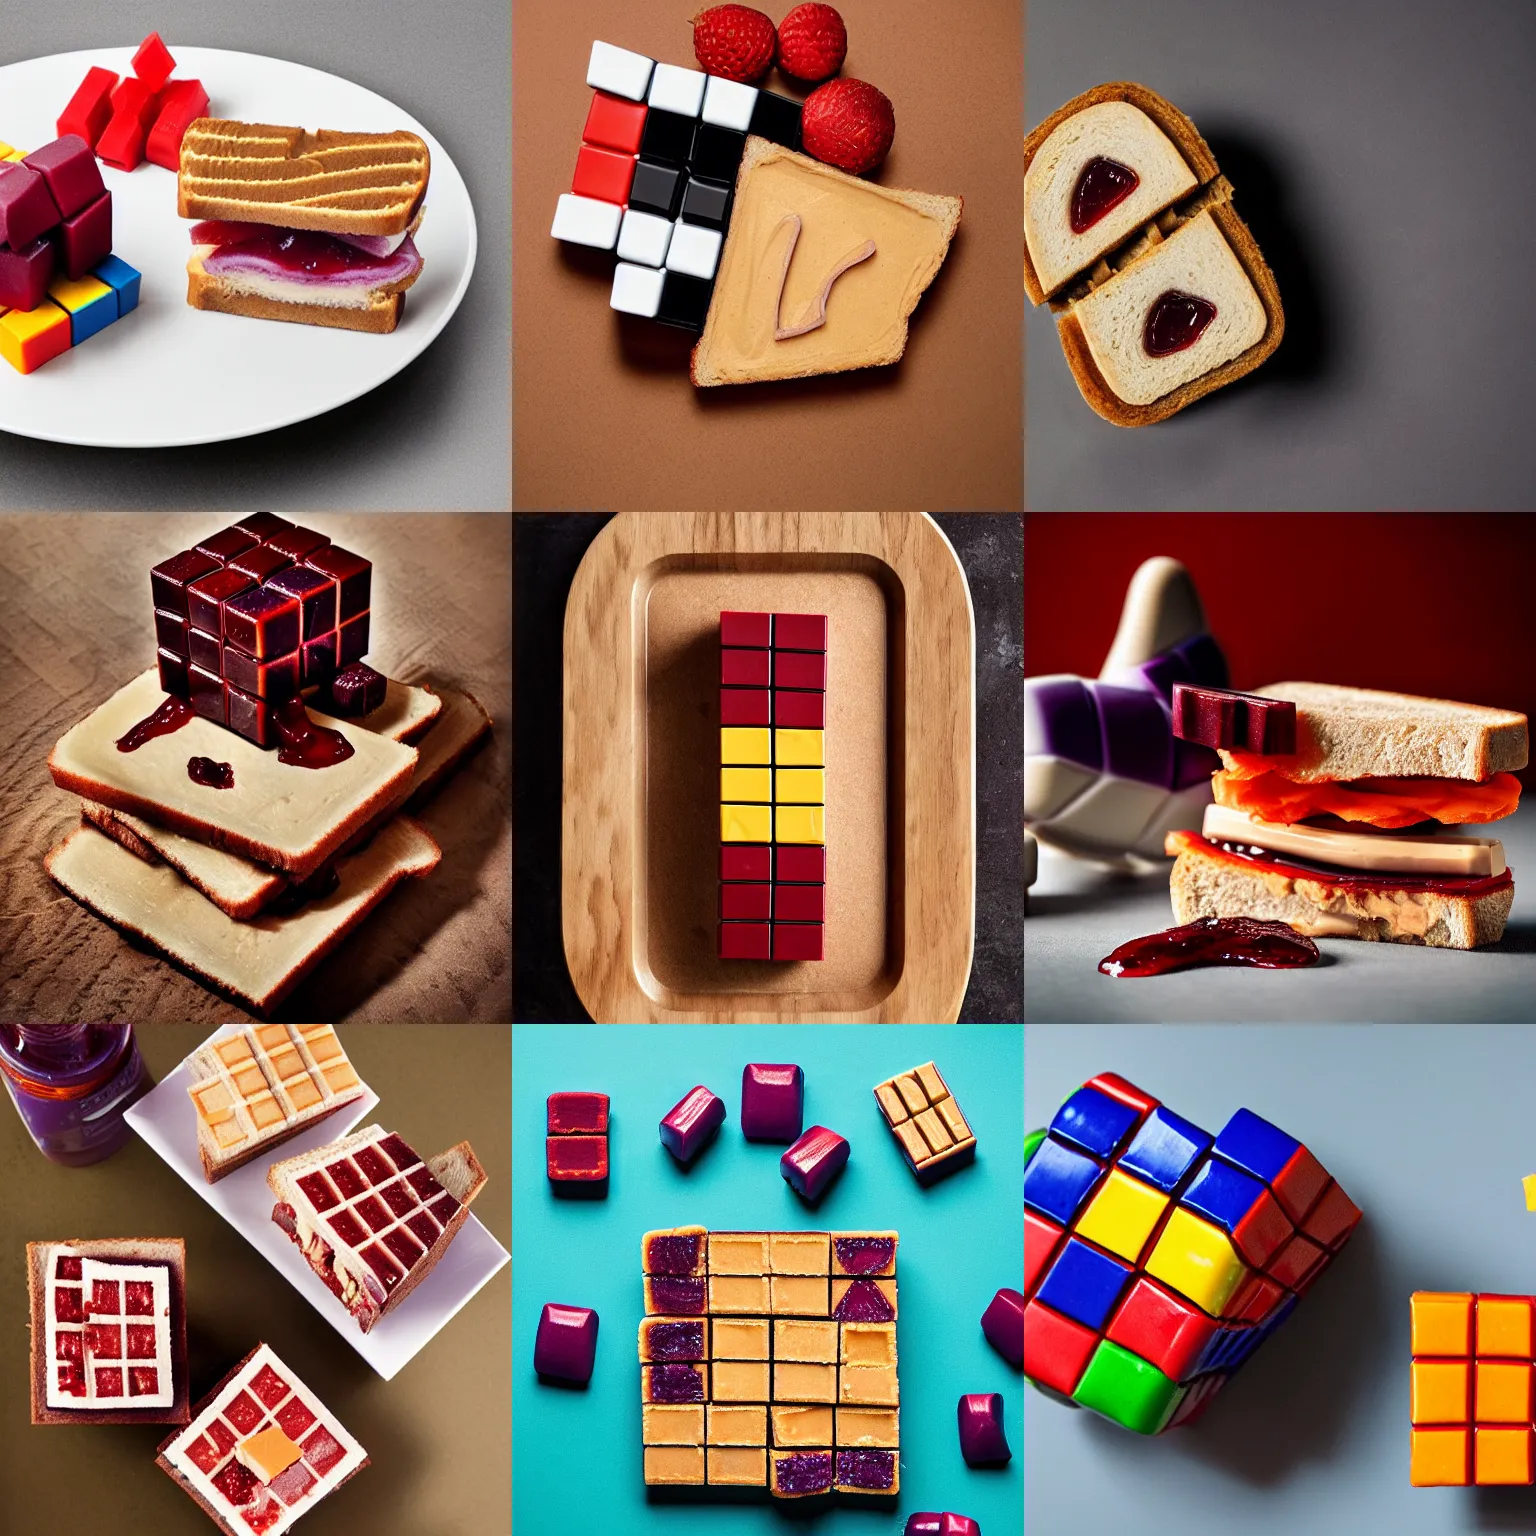 Prompt: a peanut butter and jelly sandwich in the shape of a Rubik’s cube, professional food photography